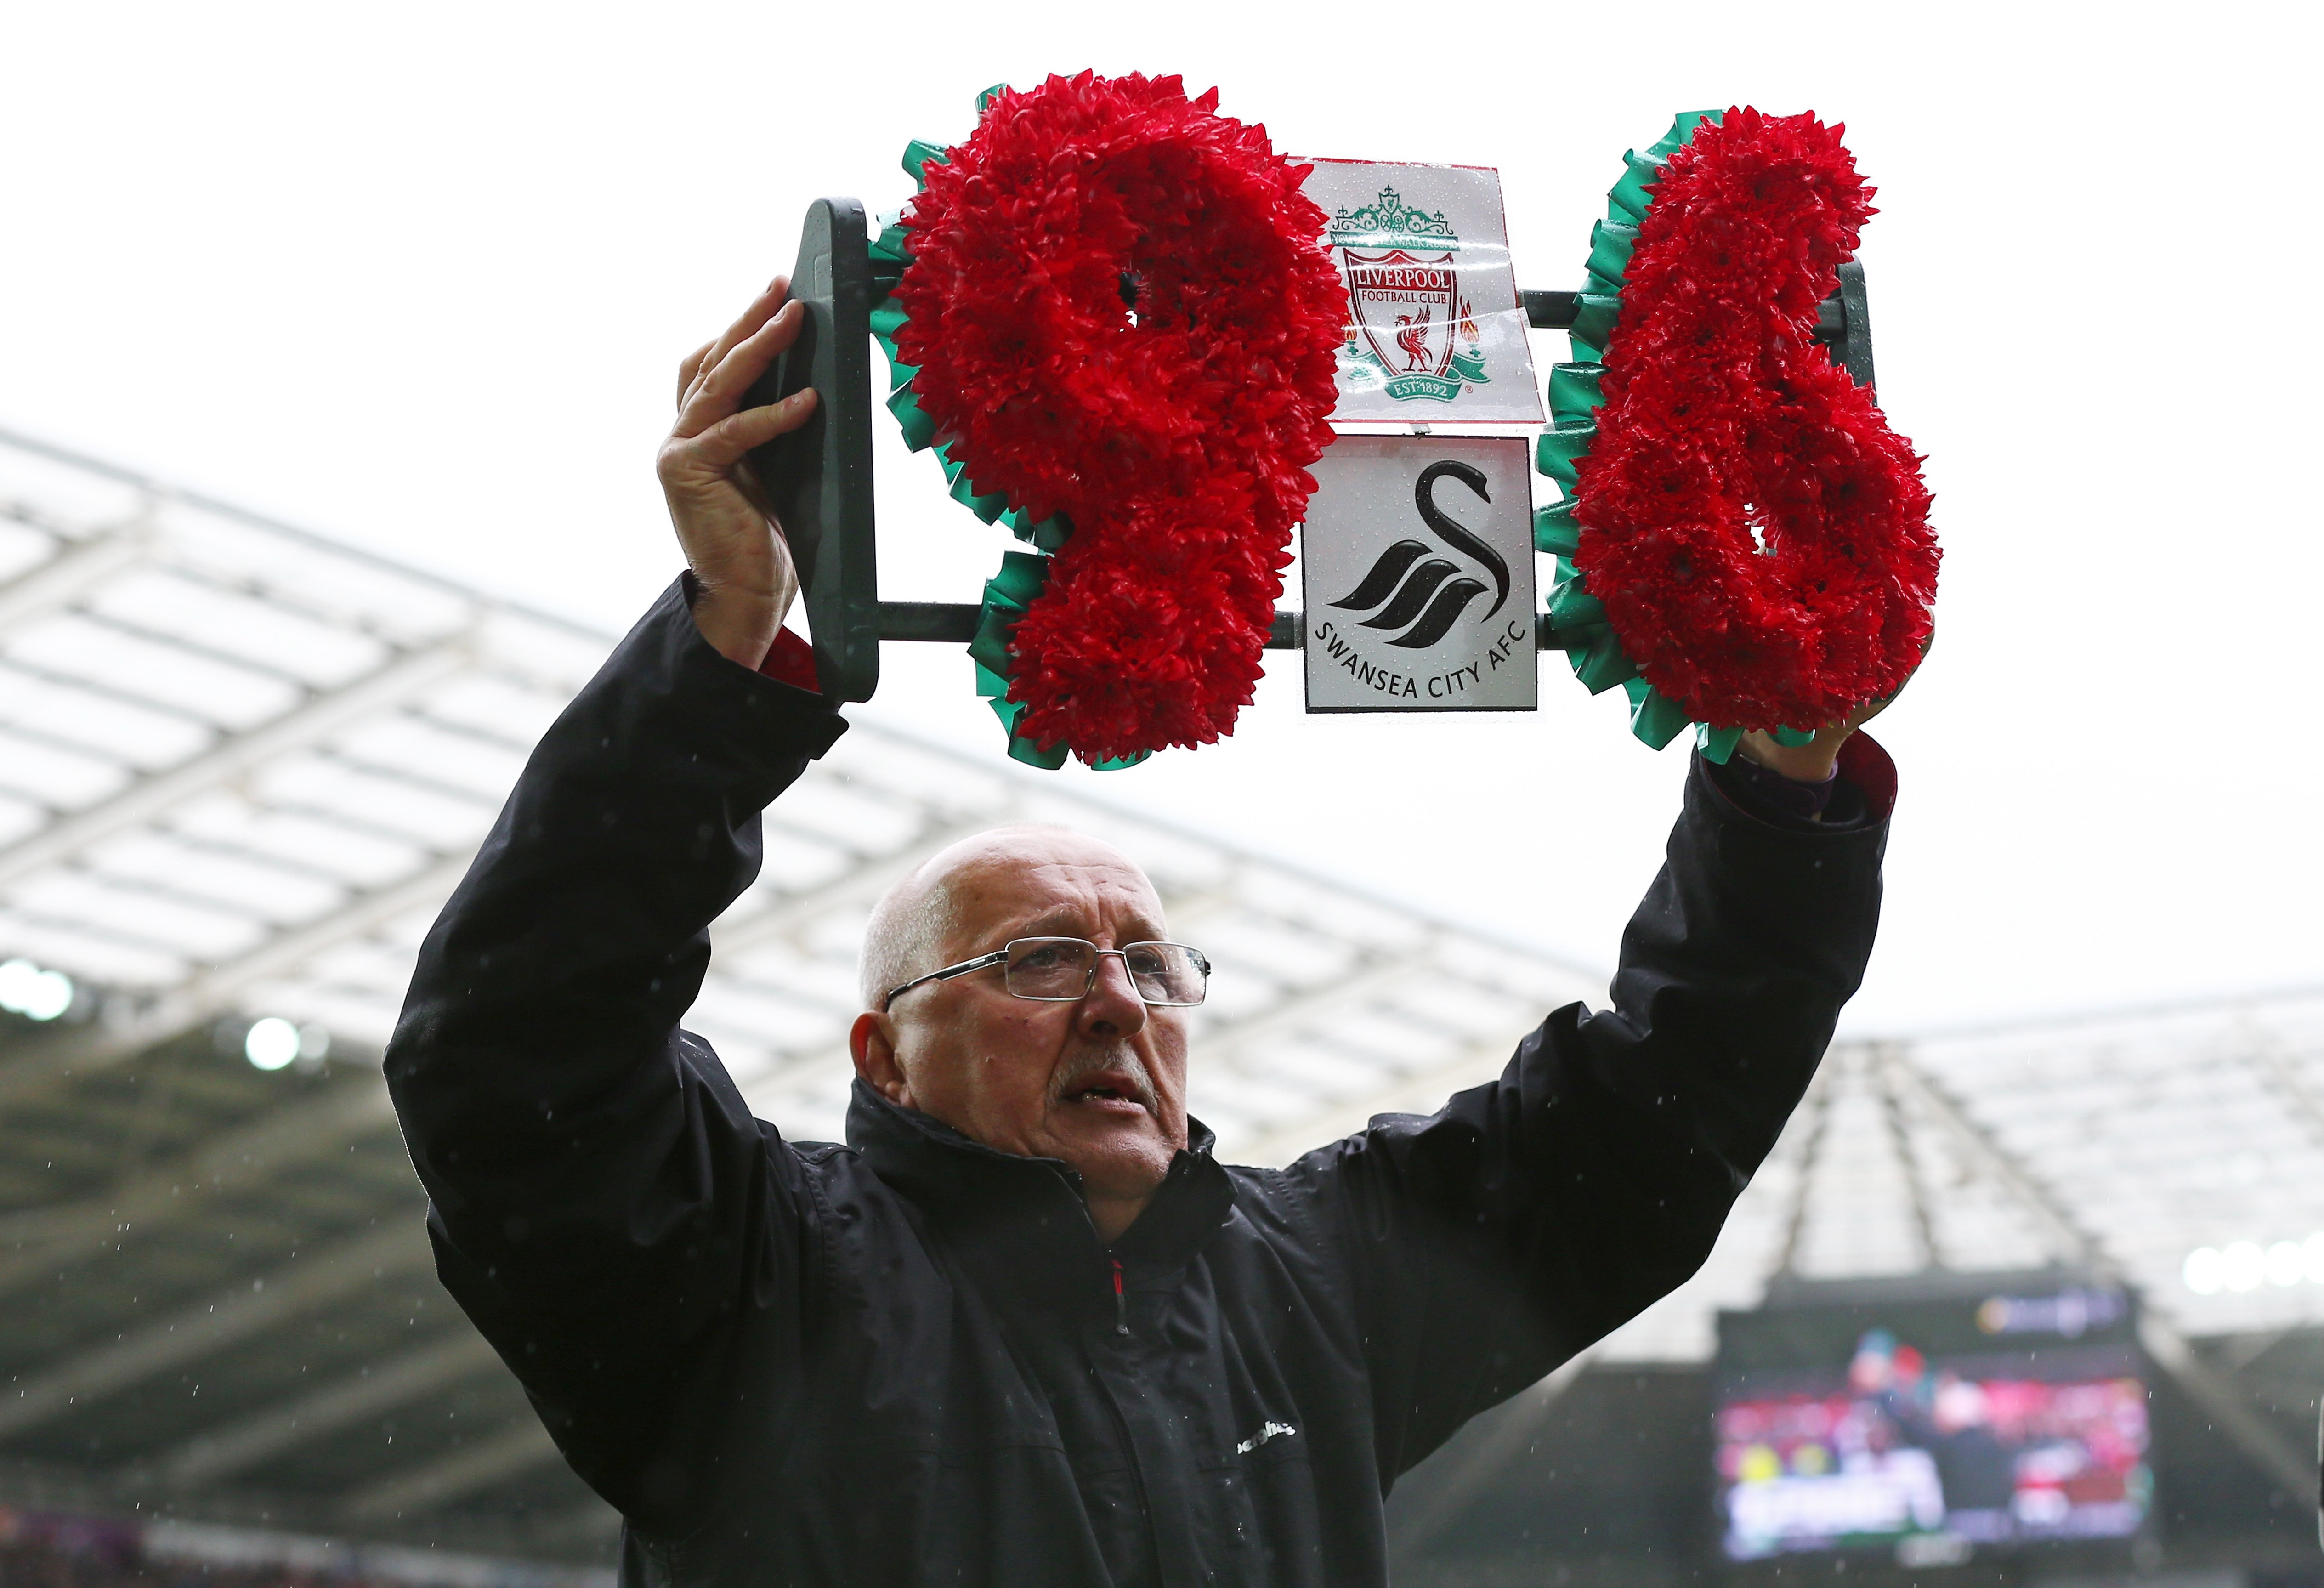 SWANSEA, WALES - MAY 01: Barry Devonside, father of Hillsborough victim Christopher Devonside carries a wreath as the team's remember the 96 victims of the Hillsborough disaster during the Barclays Premier League match between Swansea City and Liverpool at The Liberty Stadium on May 1, 2016 in Swansea, Wales. (Photo by Steve Bardens/Getty Images)